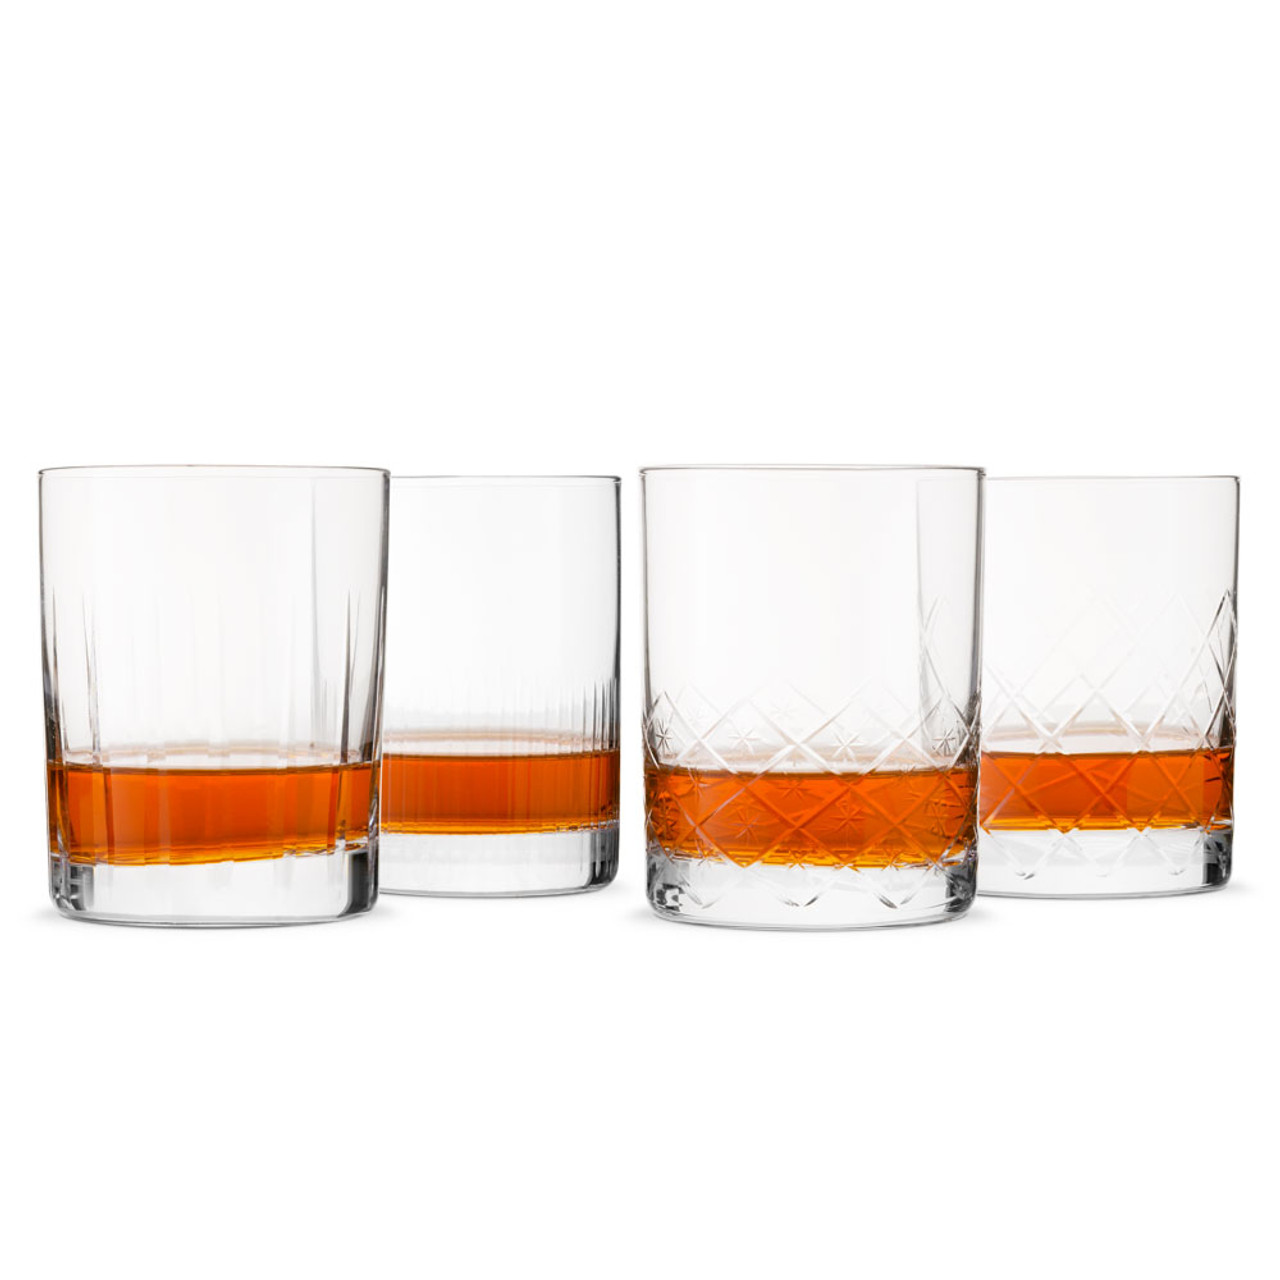 Four 1 Inch Whiskey Stainless Steel Ball Set